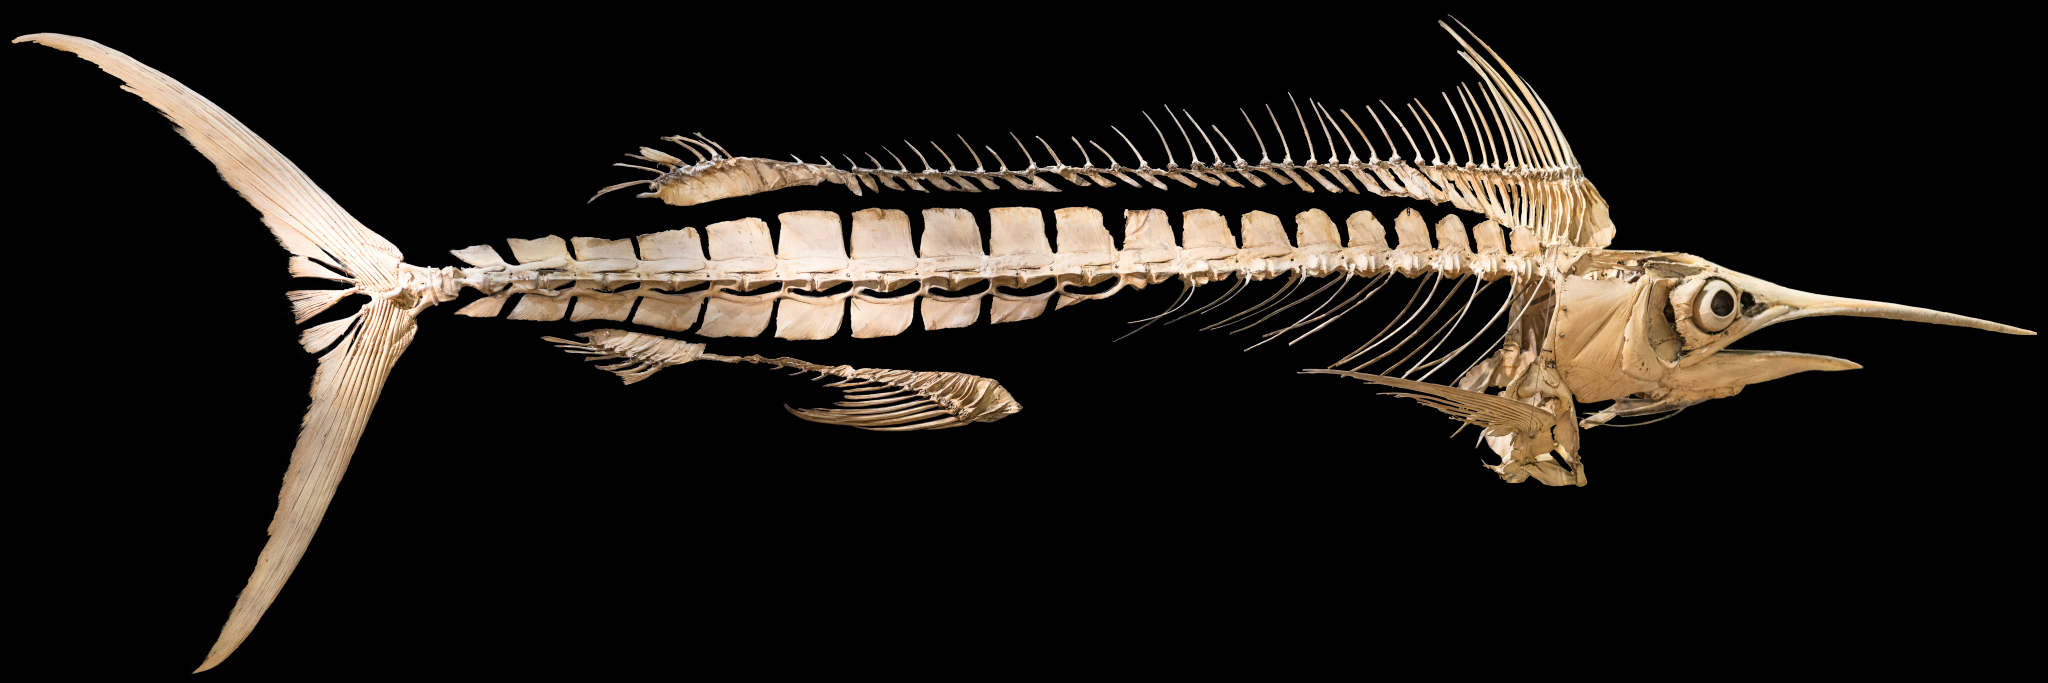 Image 2 of 2 - Skeleton of Black Marlin (Istiompax indica) on black background. From the collection of The Australian Museum